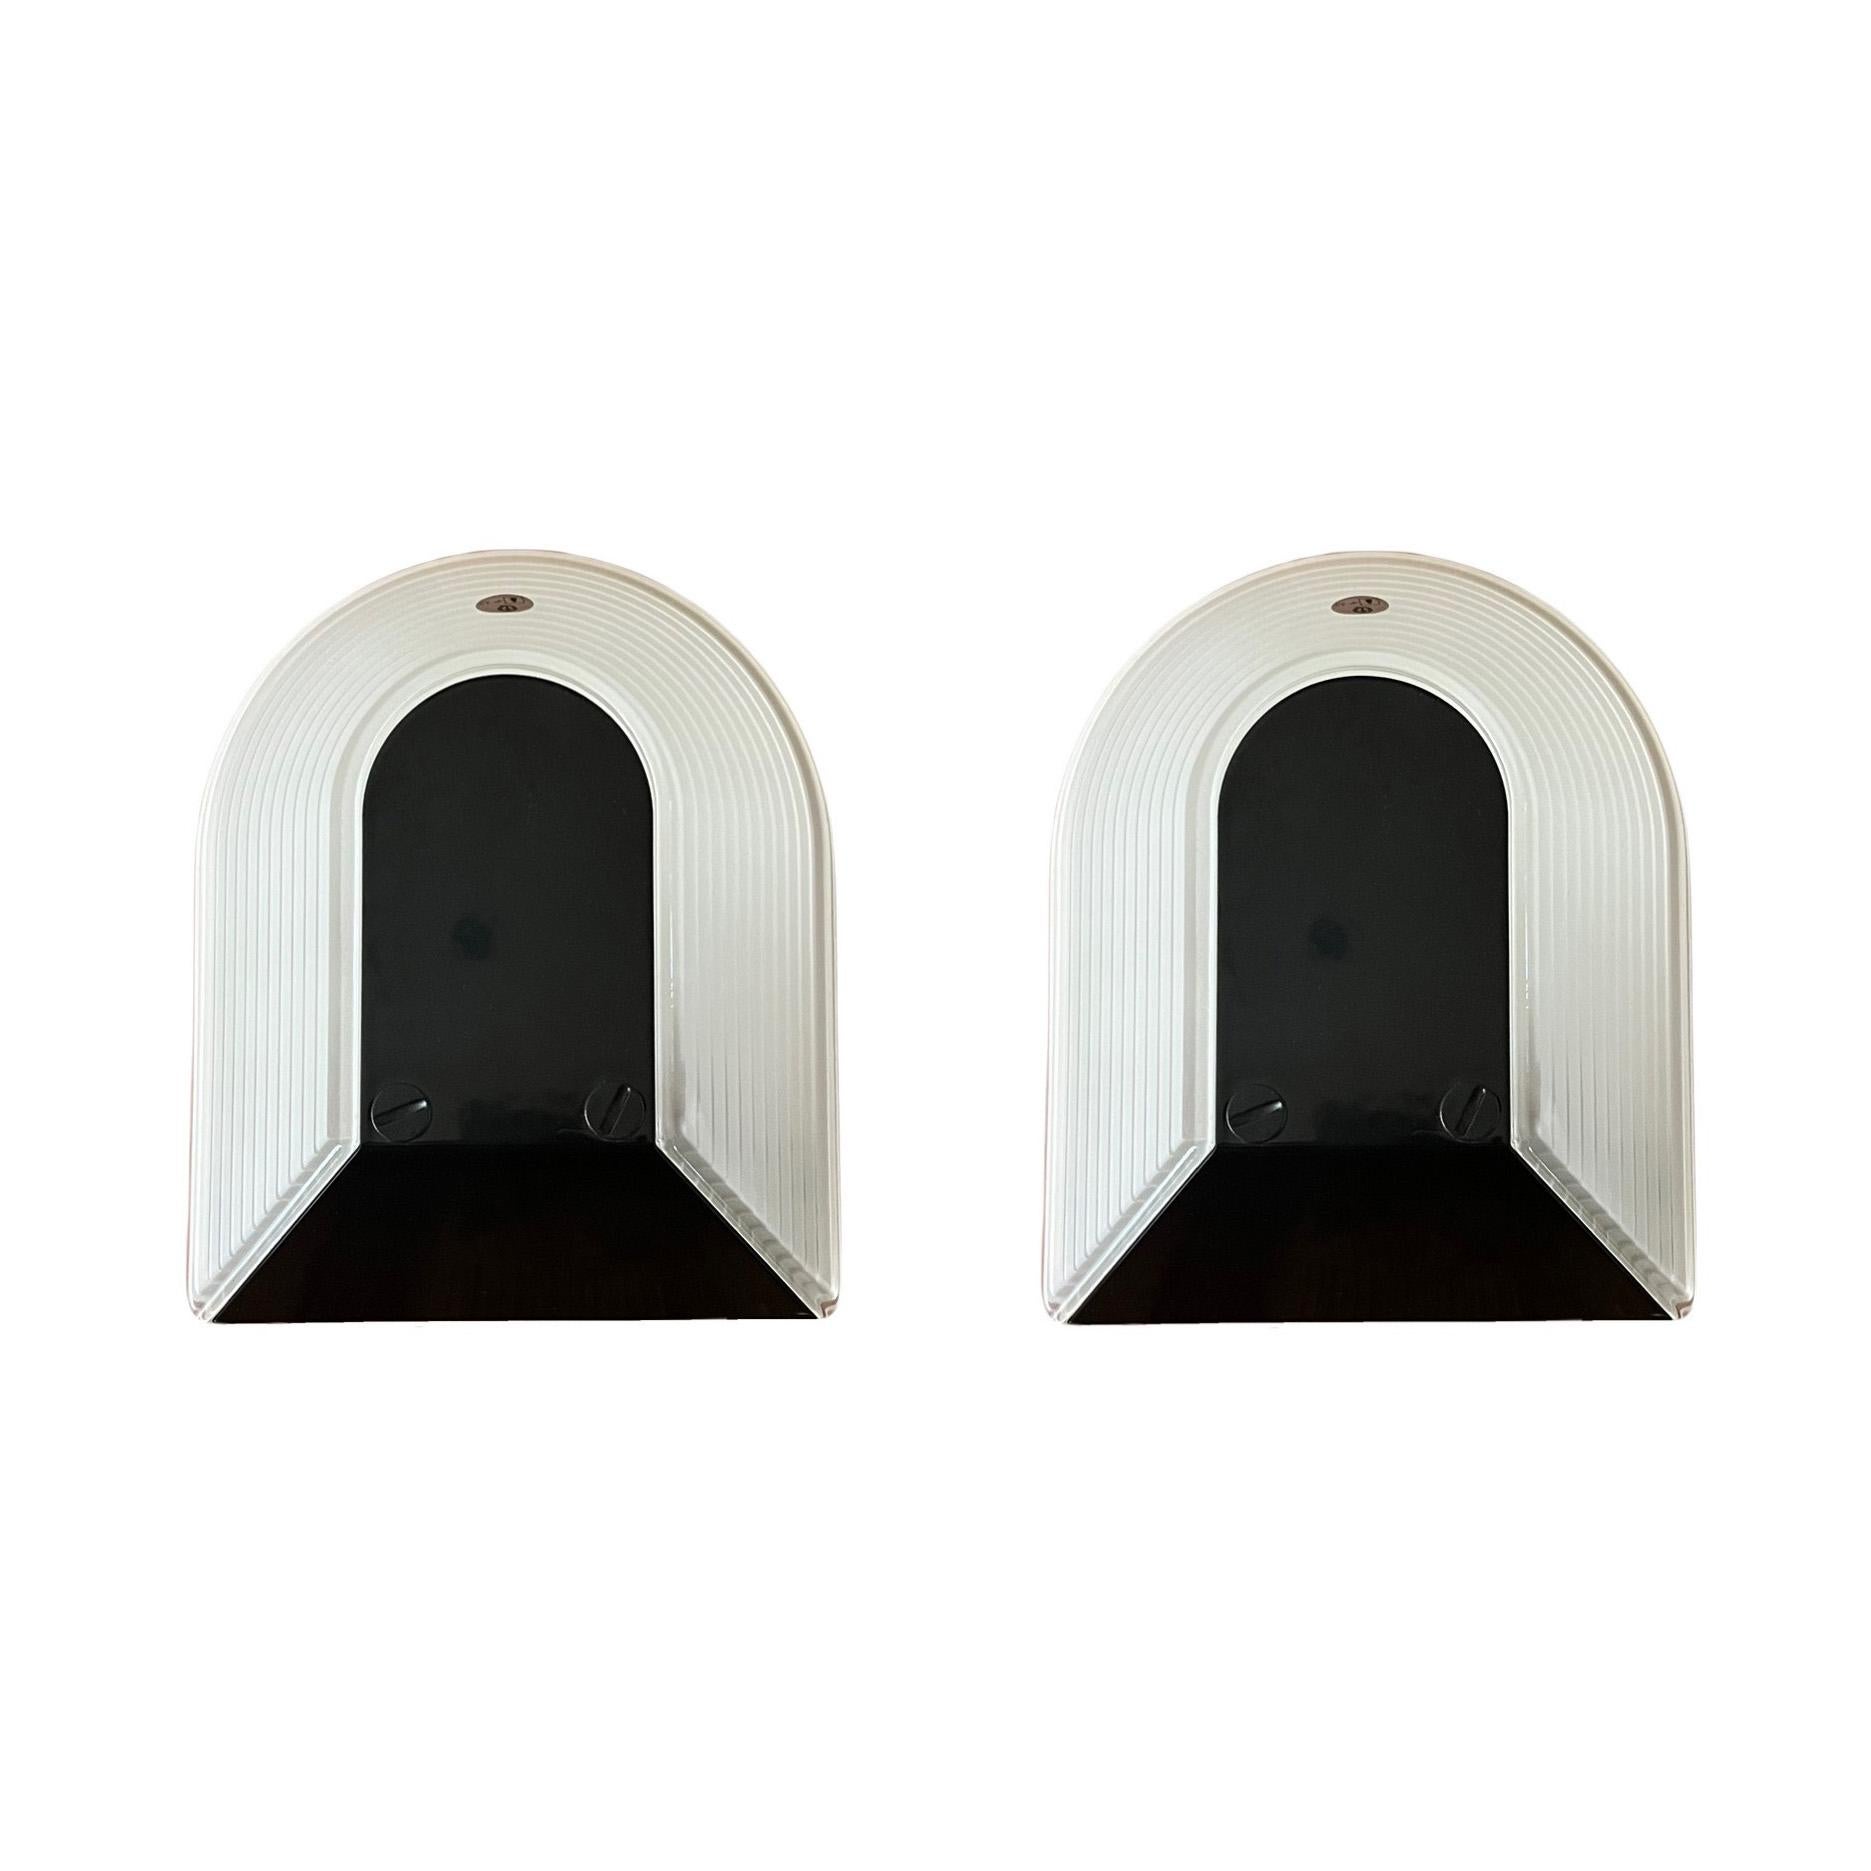 New old stock and Italian black St of three wall sconces by Roberto Fiorato. These fixtures were made during the 1980s in Italy for Prisma, model 